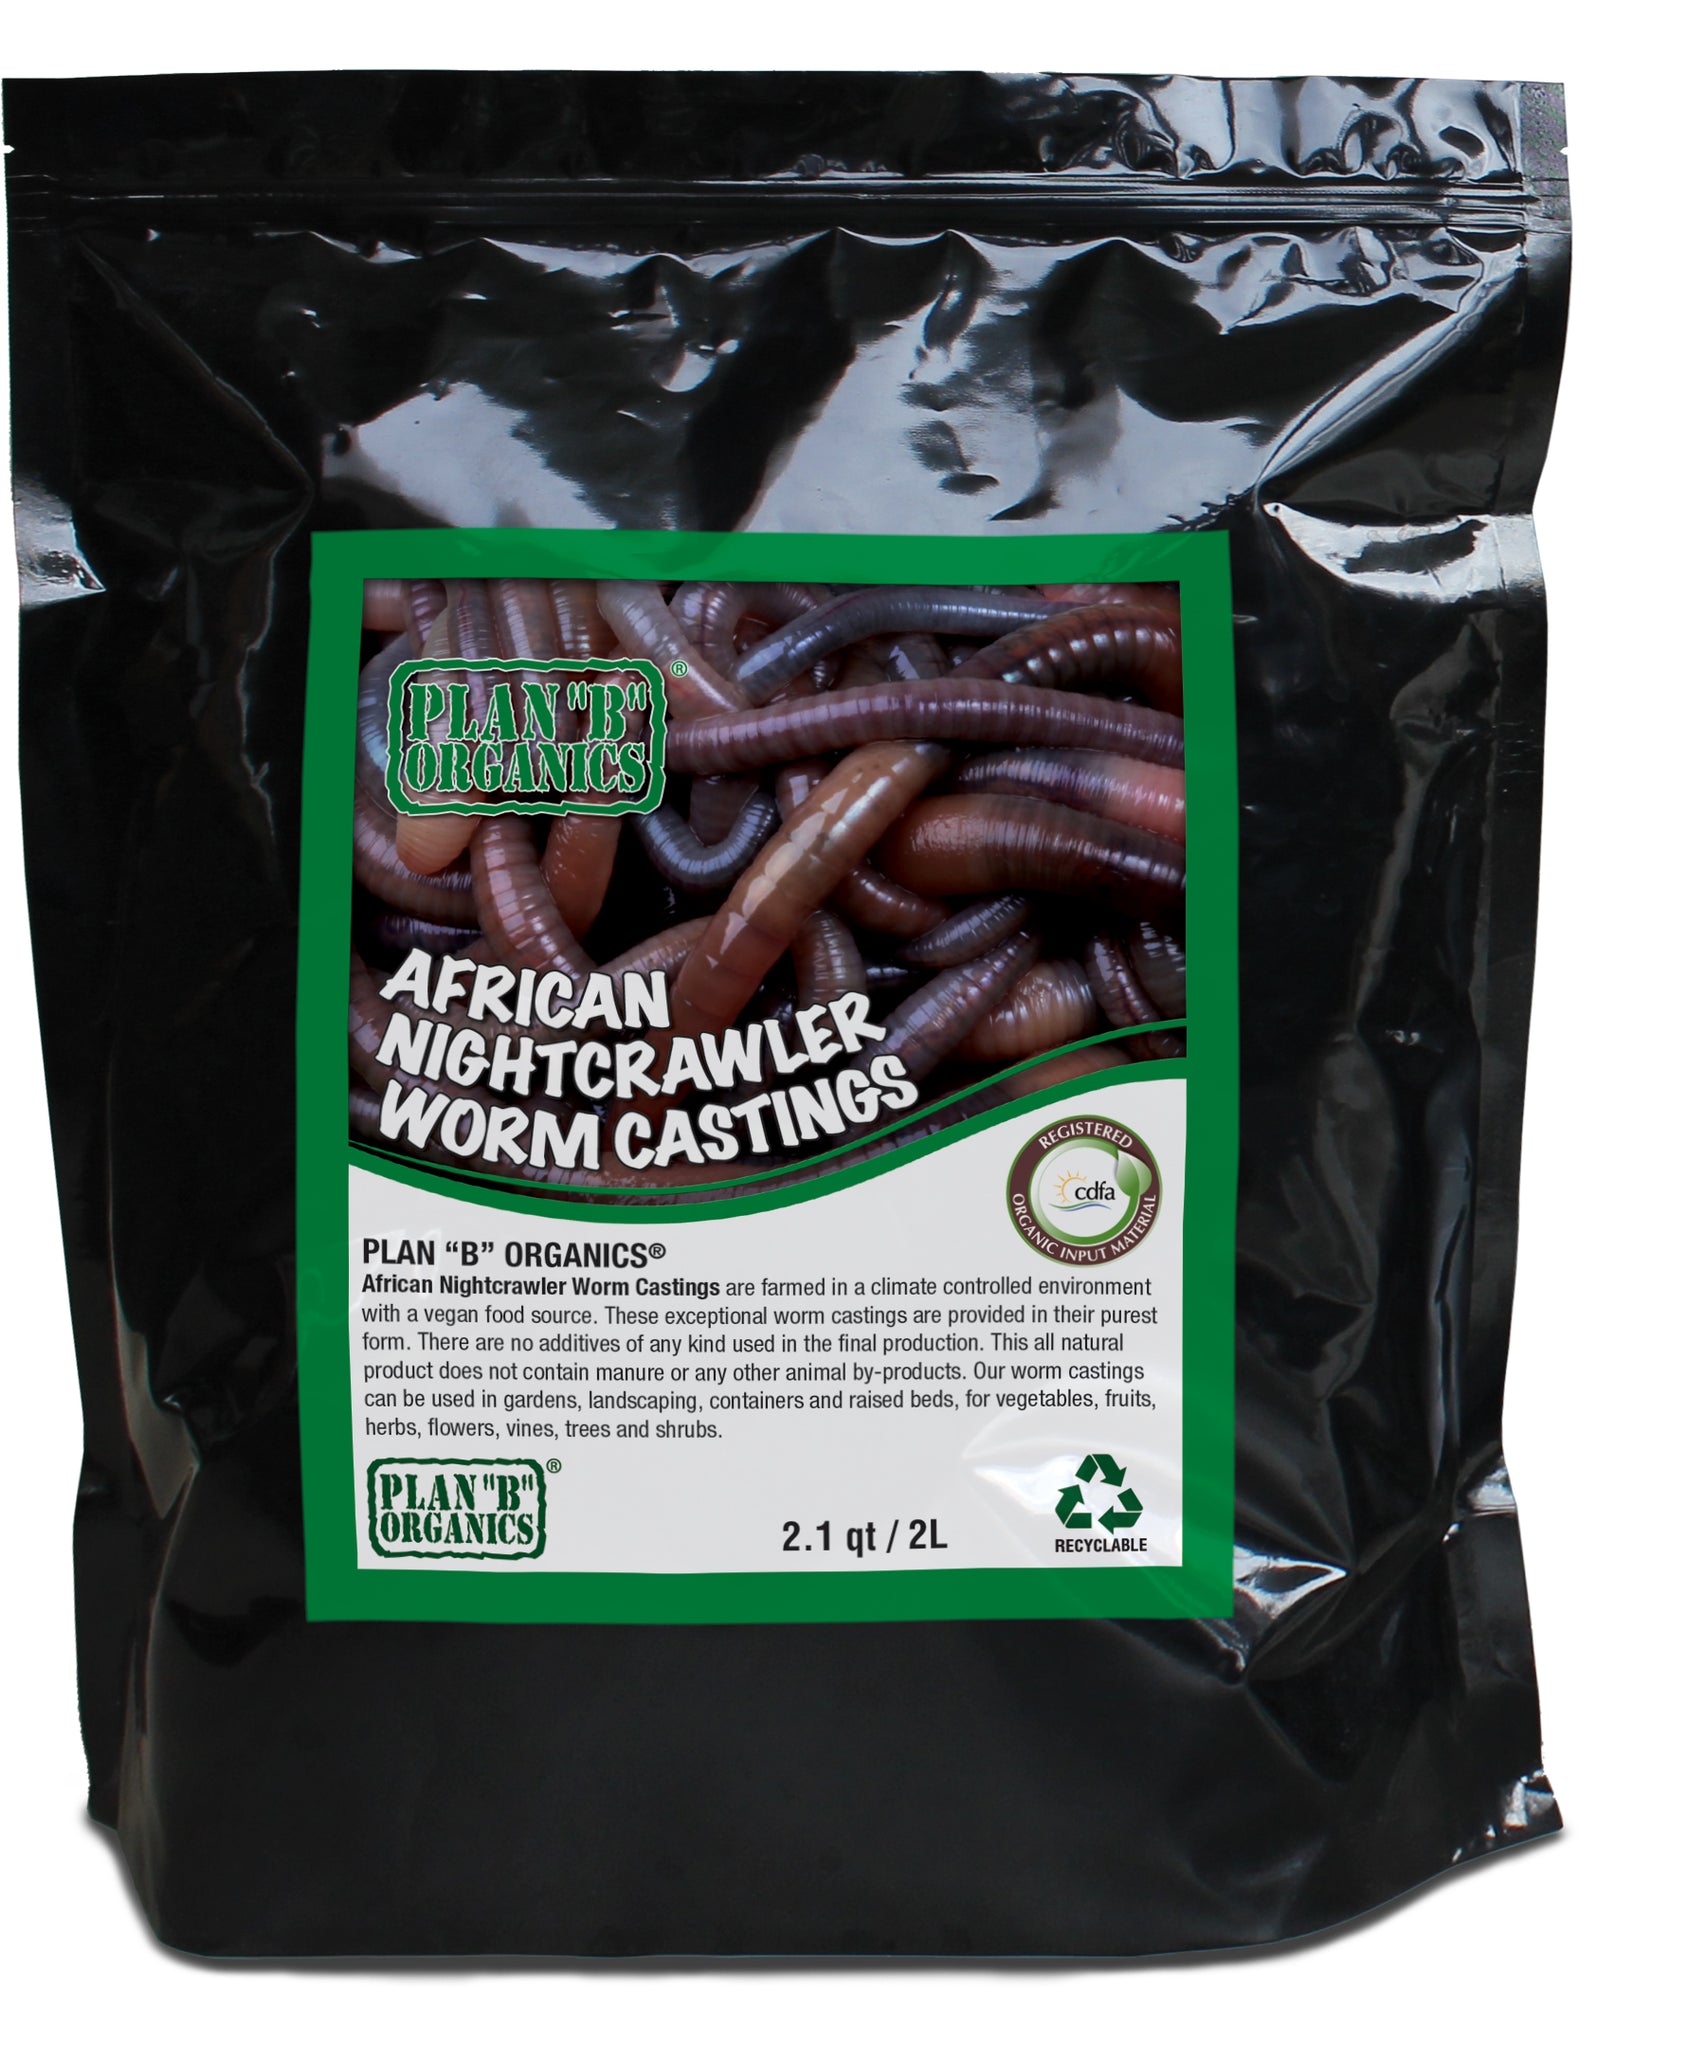 Teetat Bamrungsab - ธีธัช บำรุงทรัพย์ - For Sale the African Night Crawler(ANC)  Worm are one of the best worms for quick decomposing organic matter.  Contact us 📞: 089-827-2715 Join my Line ID 